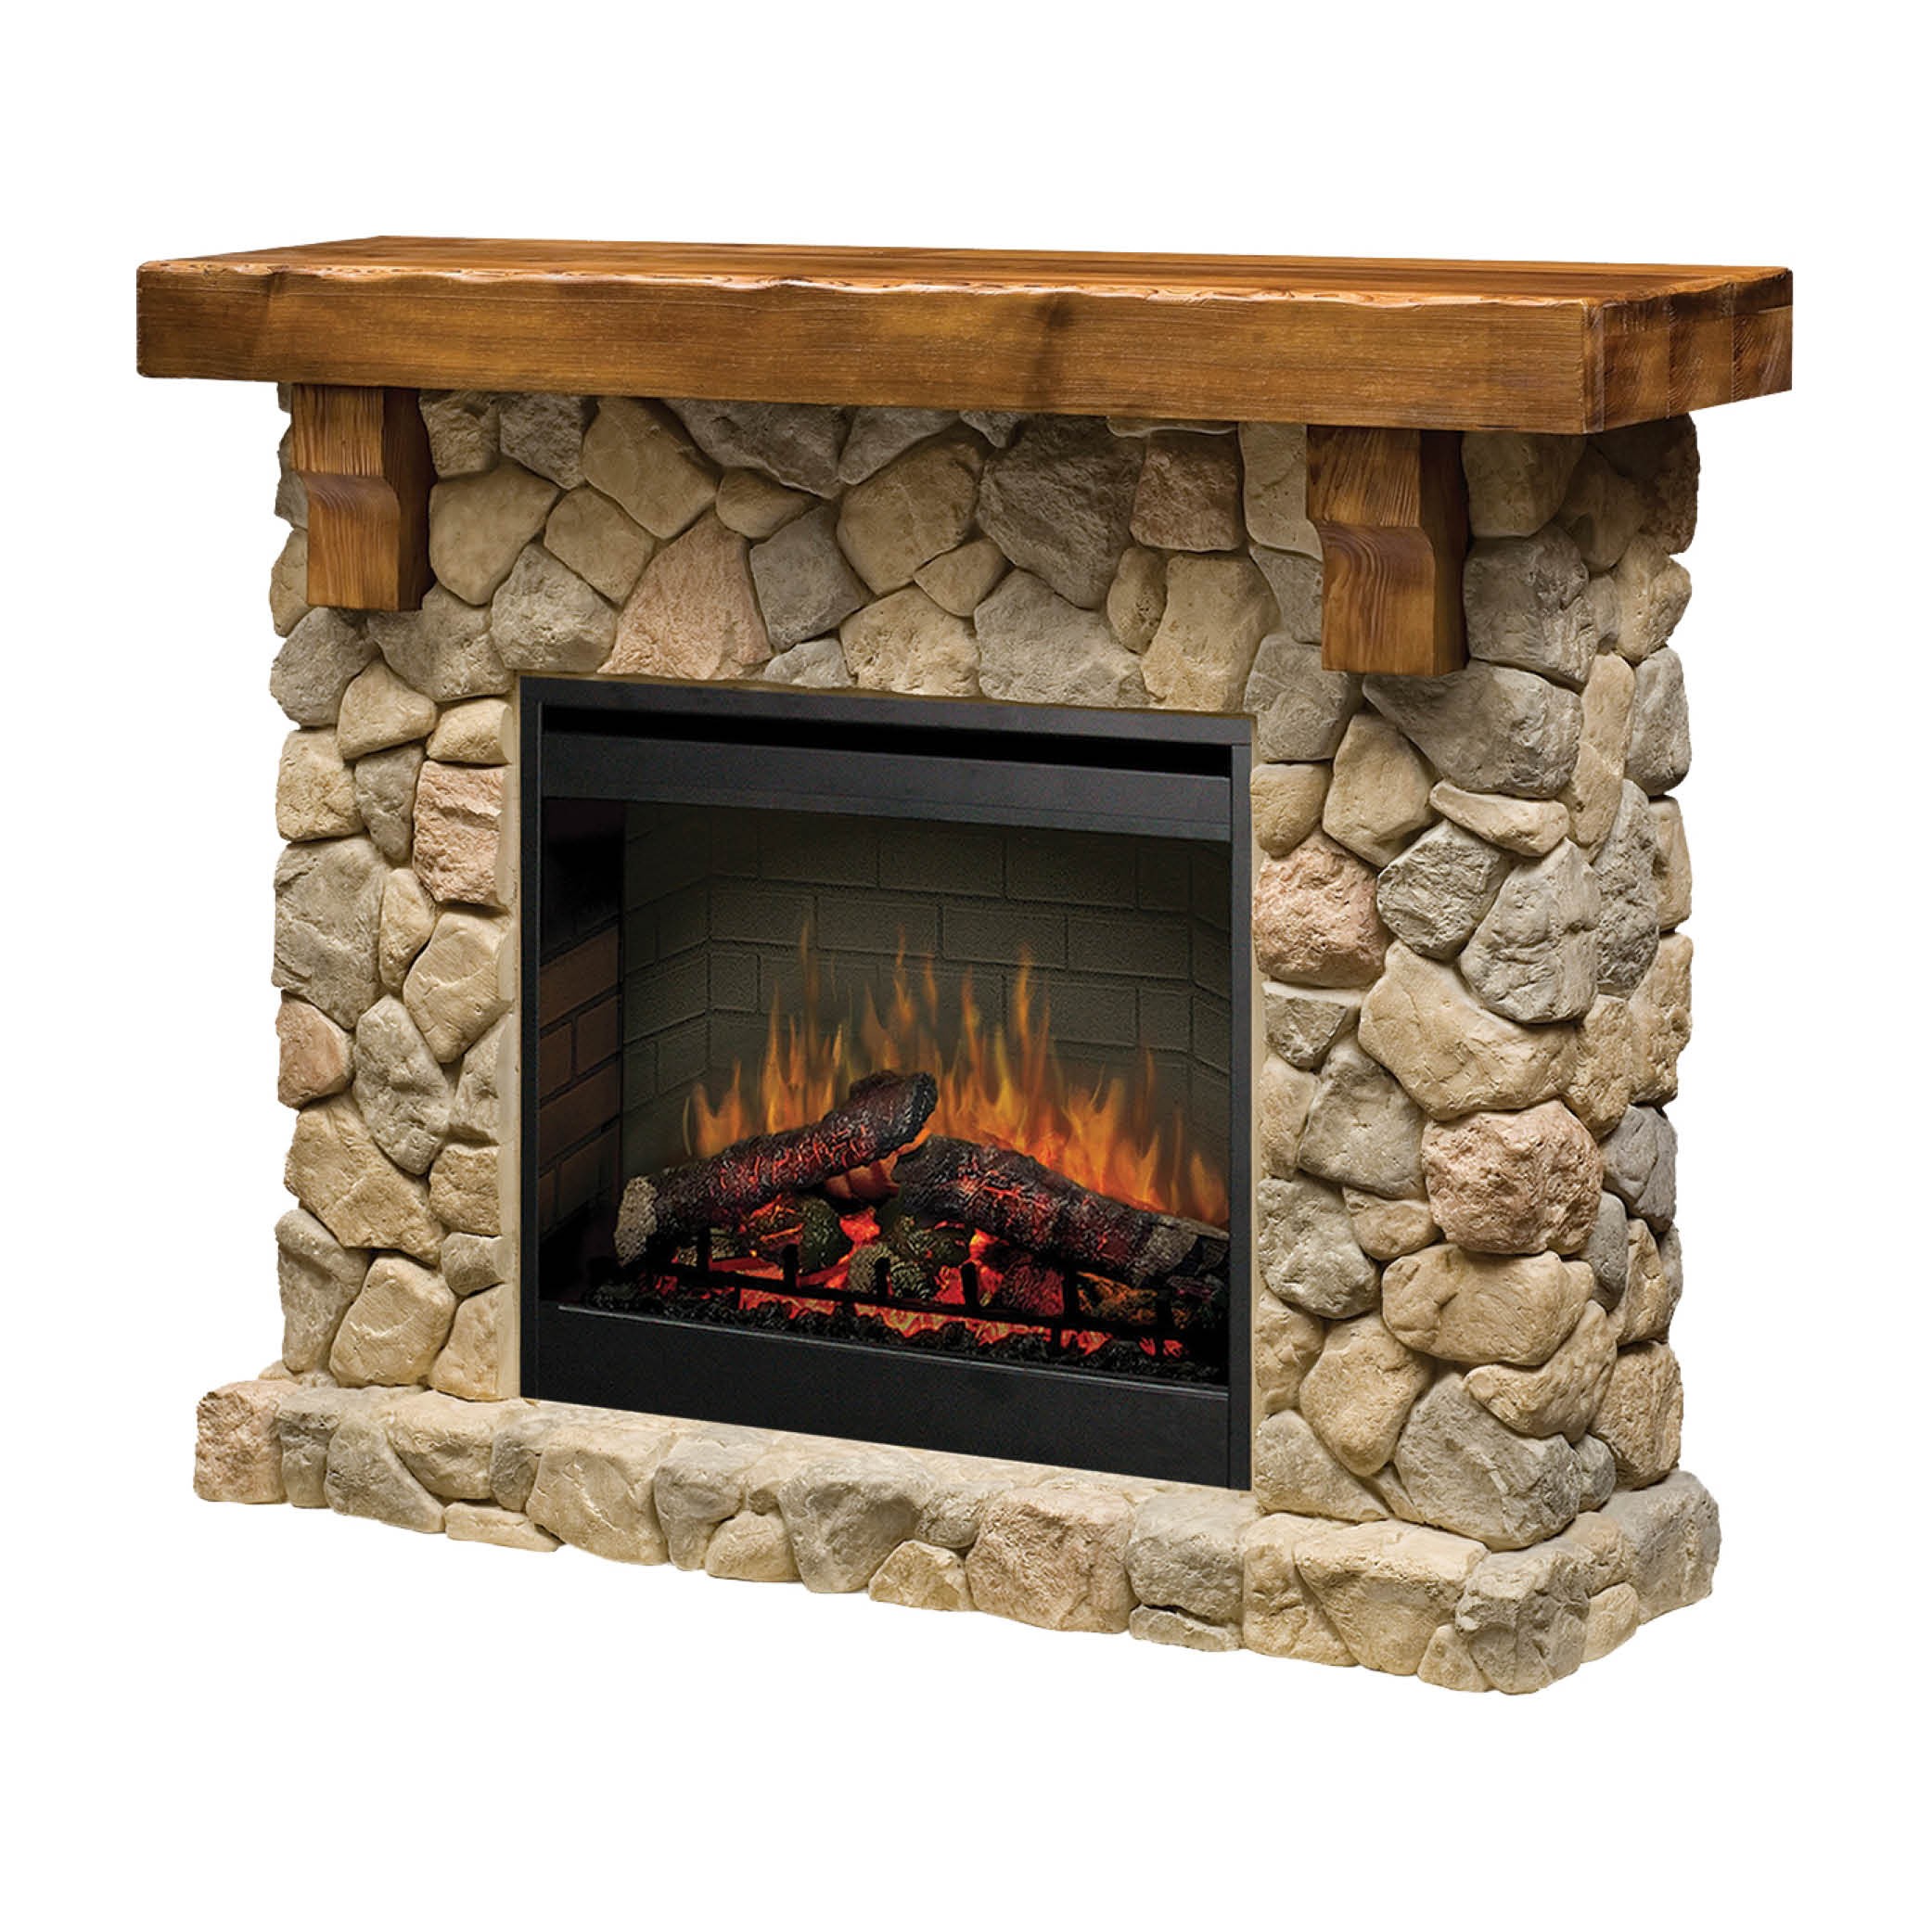 Landscape Electric Fireplace – Fireplace Guide by Linda